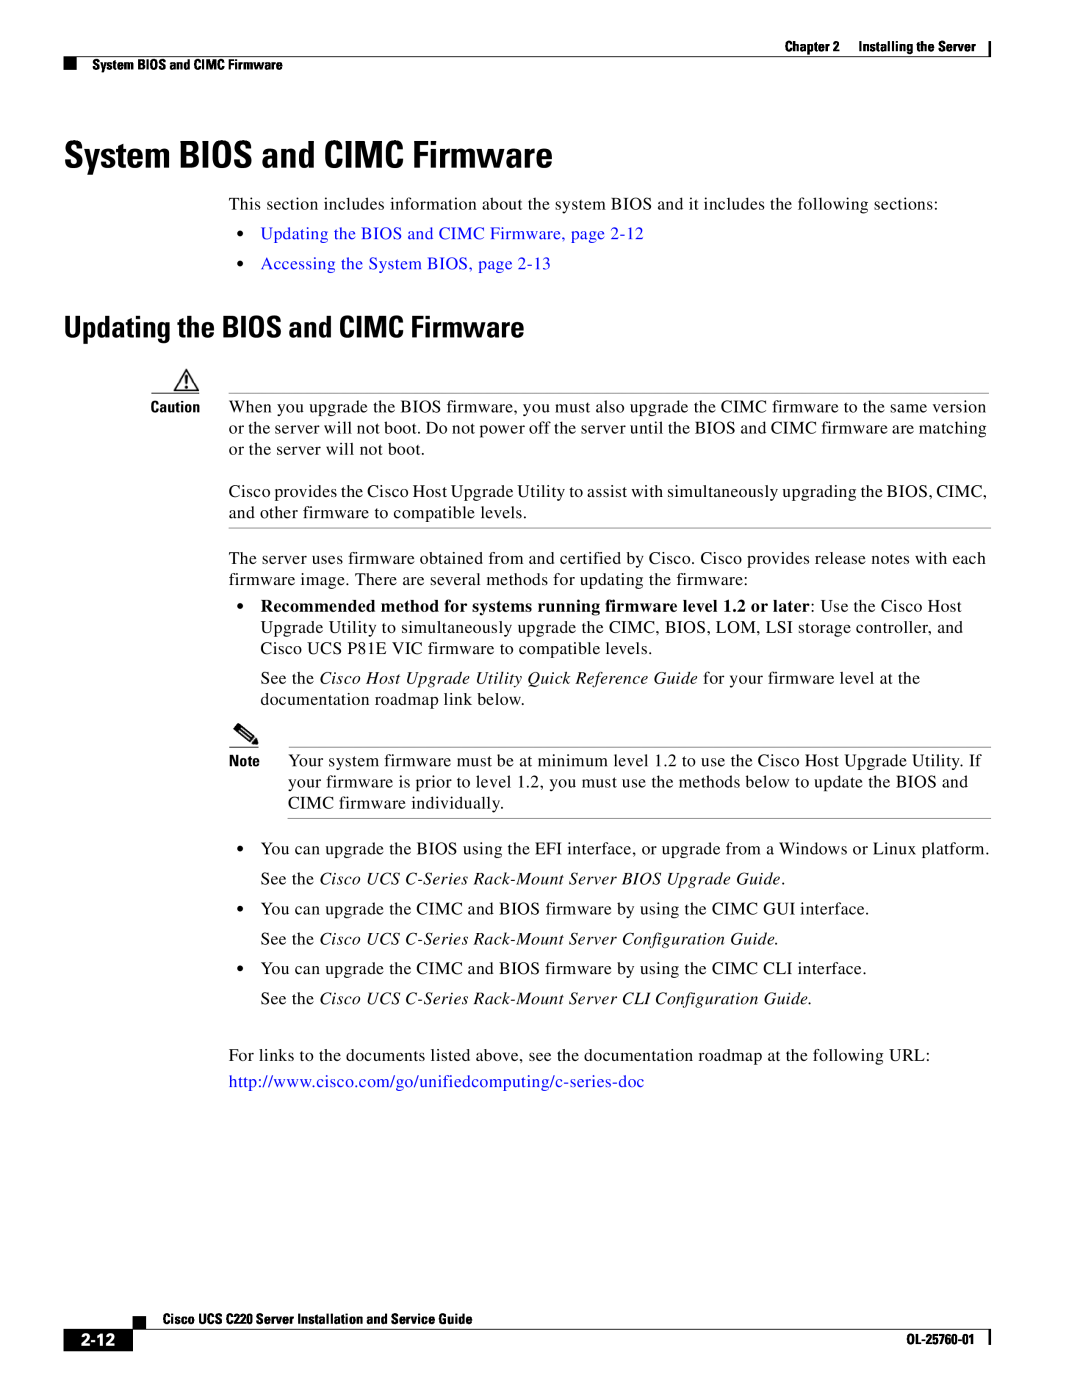 Cisco Systems C220 System BIOS and CIMC Firmware, Updating the BIOS and CIMC Firmware, Accessing the System BIOS, page 